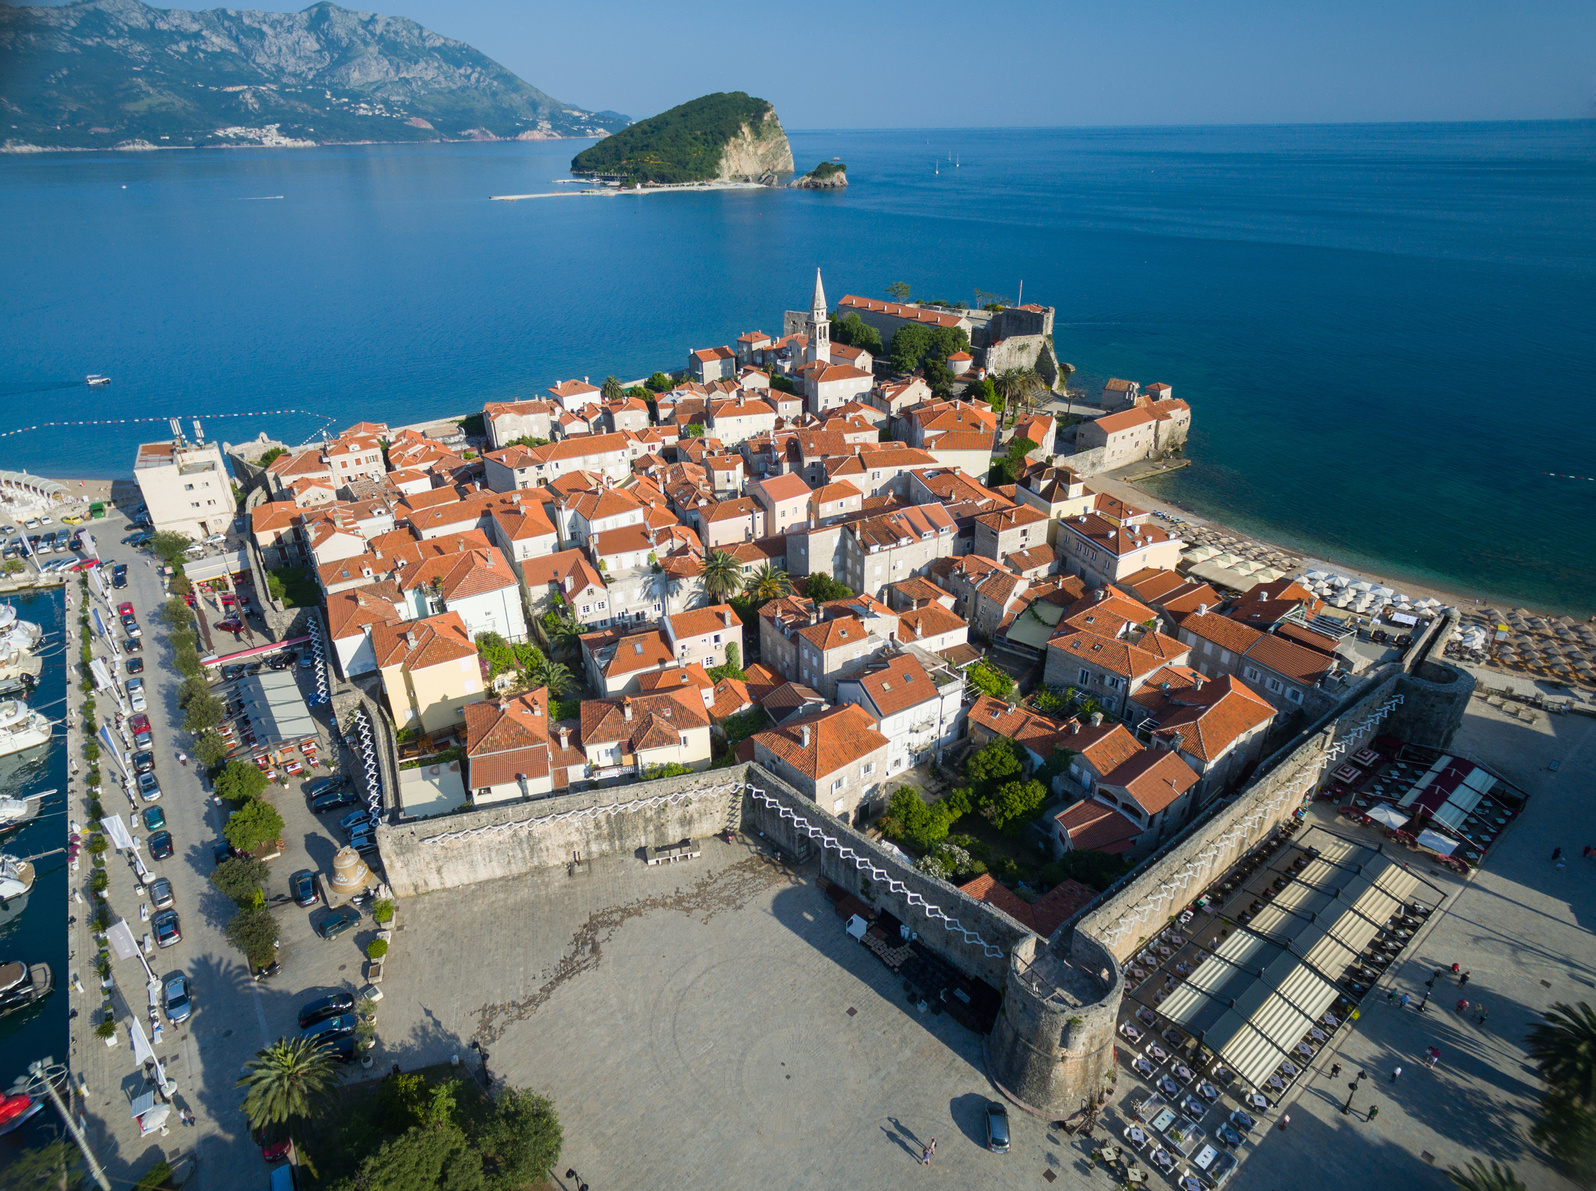 Aerial View of Old Budva. Montenegro, Balkans, Europe. Budva - One of the Most Popular Resorts of Adriatic Riviera of the Mediterranean.